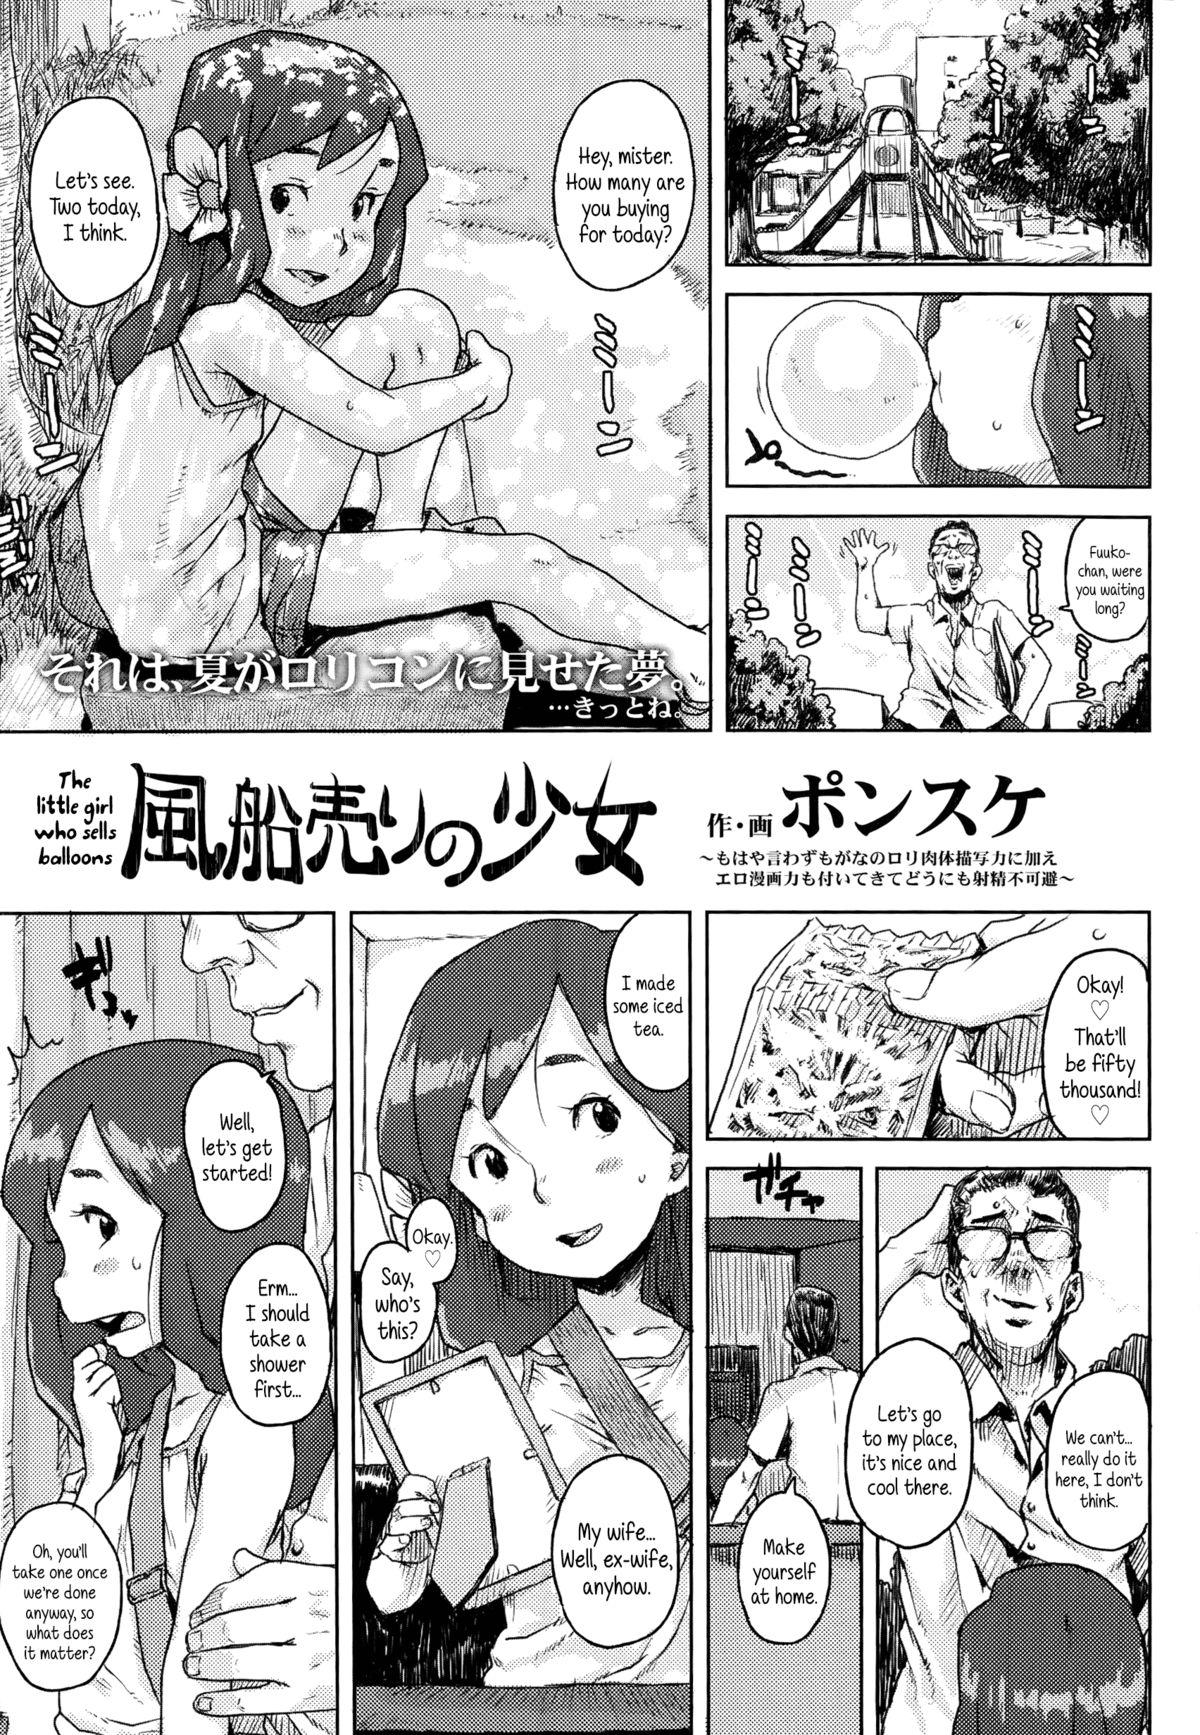 Dominate Fuusen Uri no Shoujo | The Girl Who Sells Balloons Doublepenetration - Picture 1